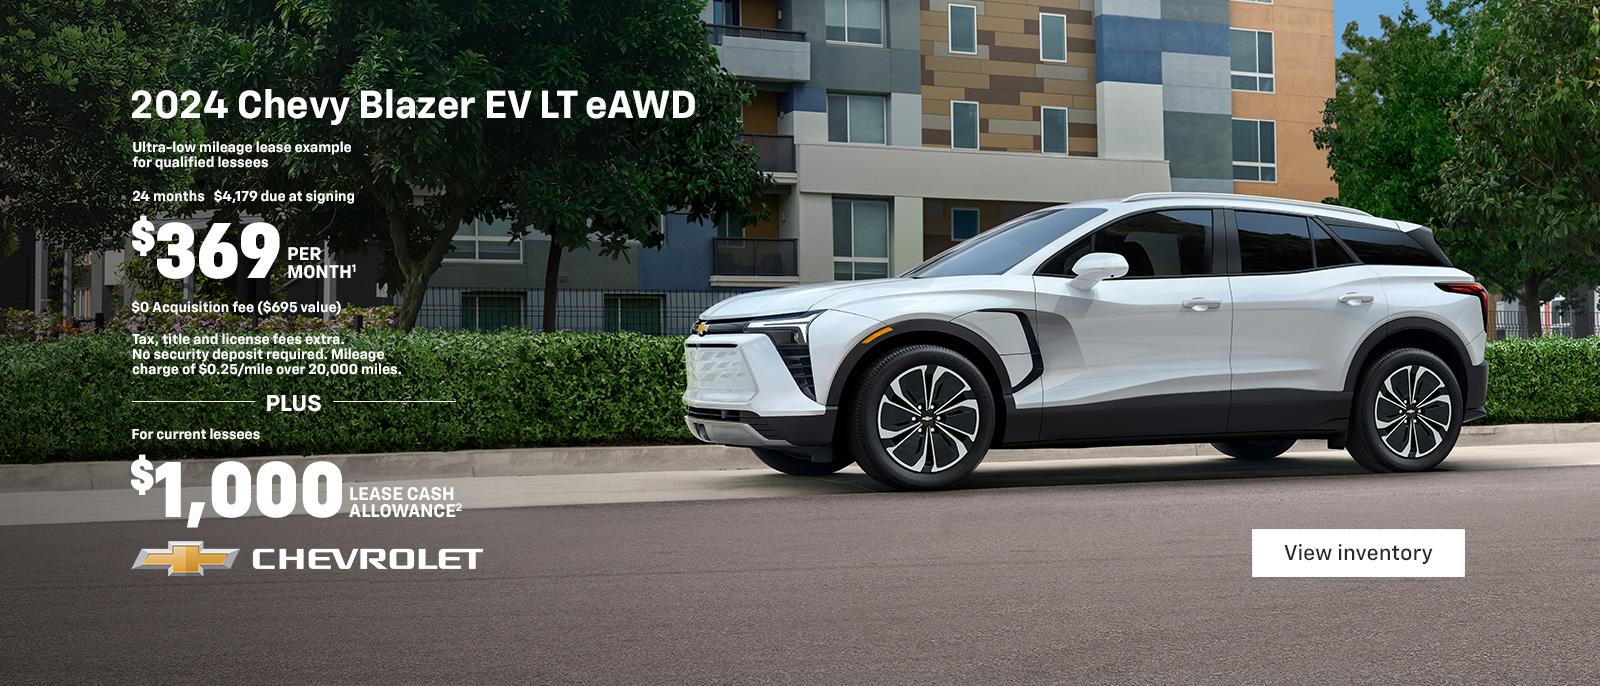 2024 Chevy Blazer EV LT. 2024 MotorTend SUV of the Year. The first-ever, all-electric Blazer EV. Ultra-low mileage lease example for qualified lessees. $369 per month. 24 months. $4,179 due at signing. $0 Acquisition fee ($695 value). Tax, title and license fees extra. No security deposit required. Mileage charge of $0.25/mile over 20,000 miles. Plus for current lessees $1,000 lease cash allowance.